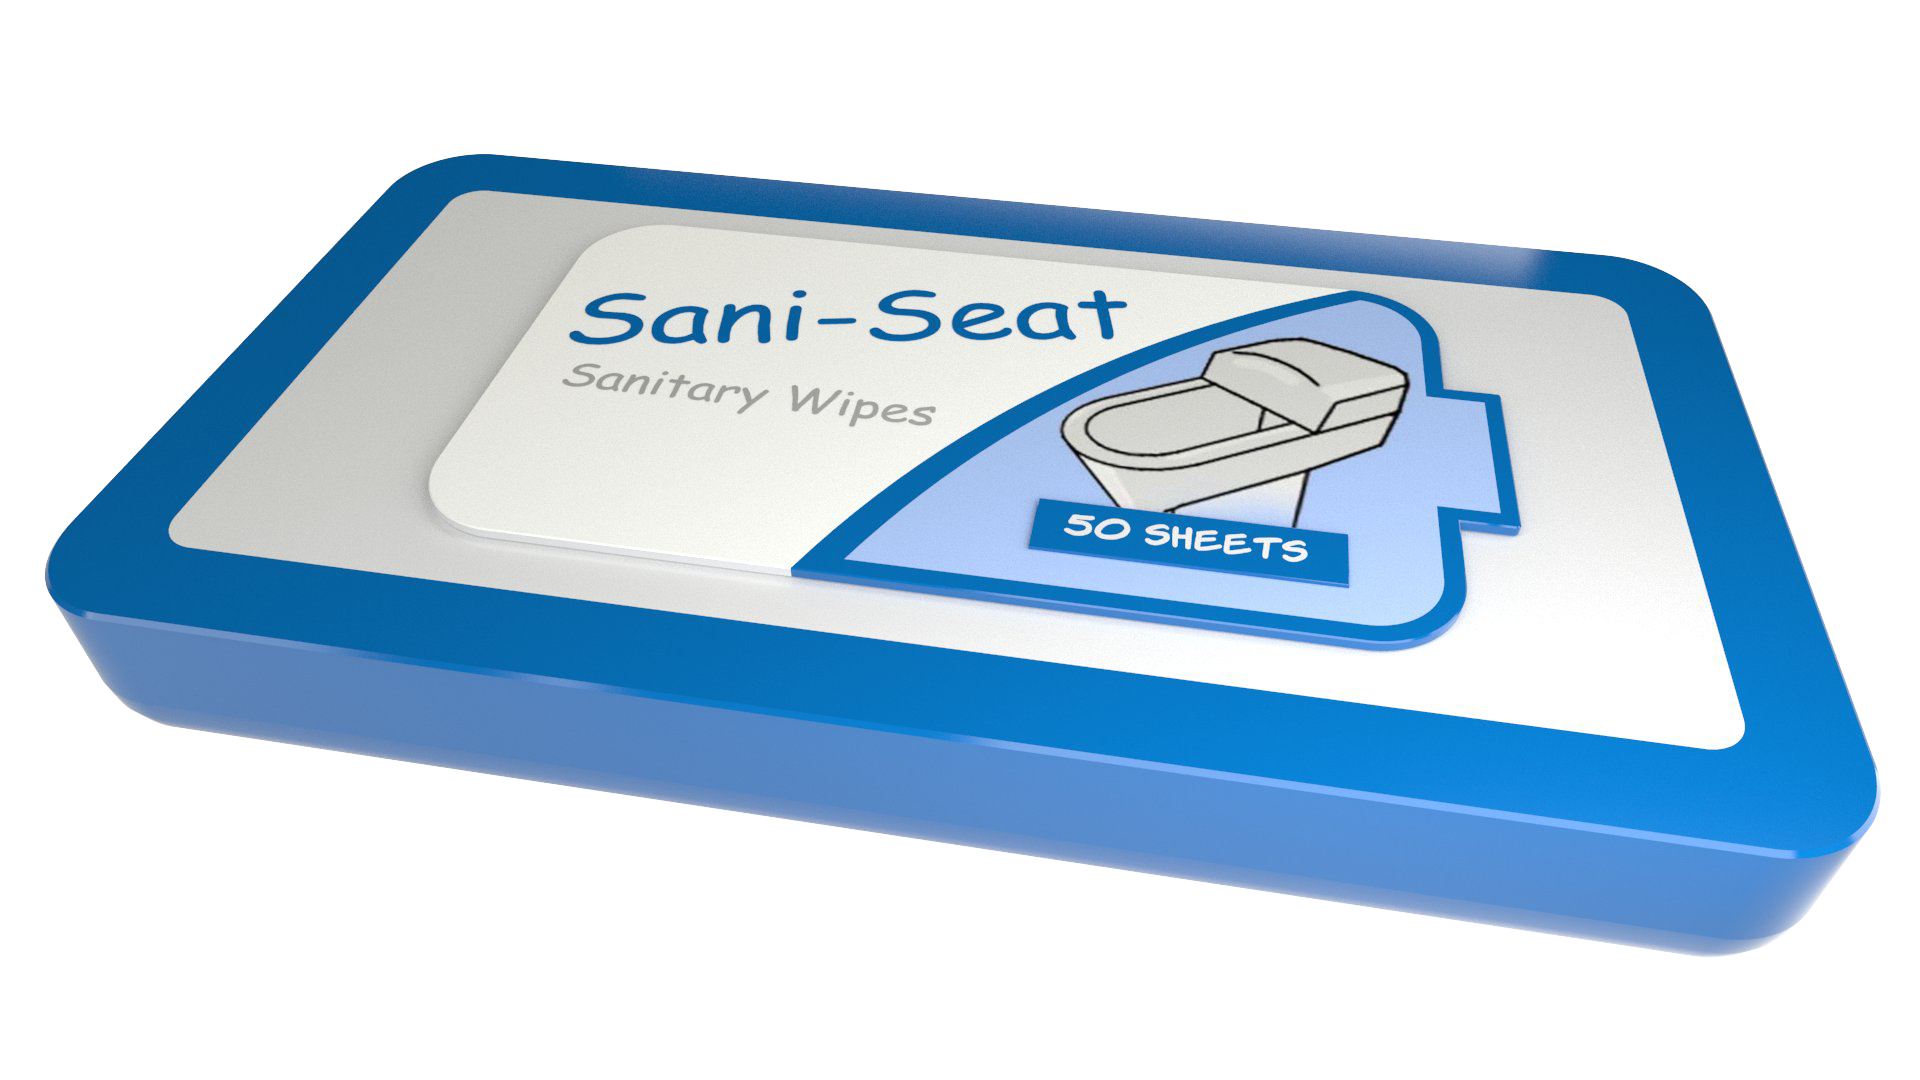 Sani-Seats are sanitary wipes that can be used to clean the toilets before being used.